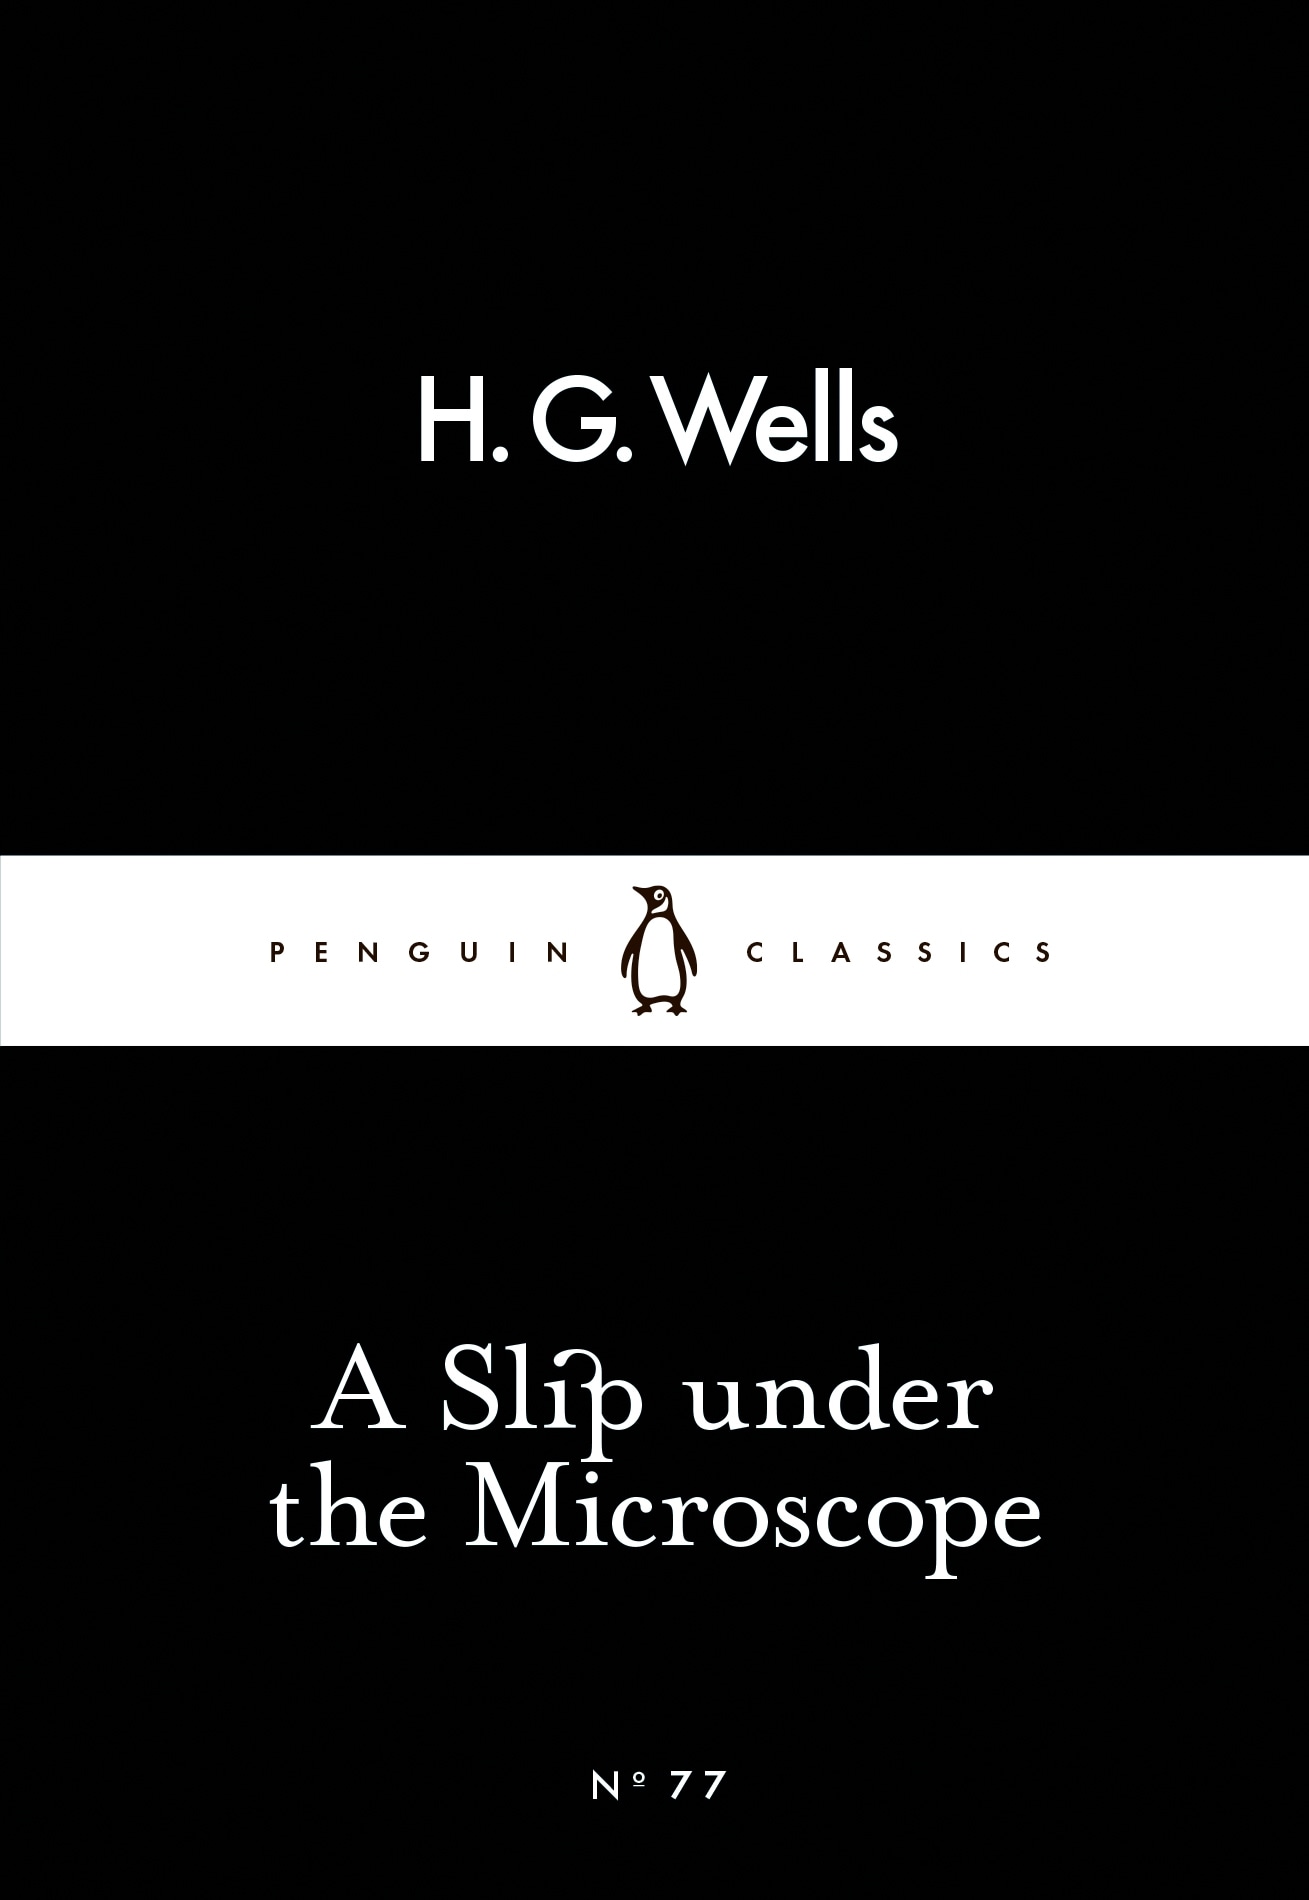 Book “A Slip Under the Microscope” by H G Wells — February 26, 2015